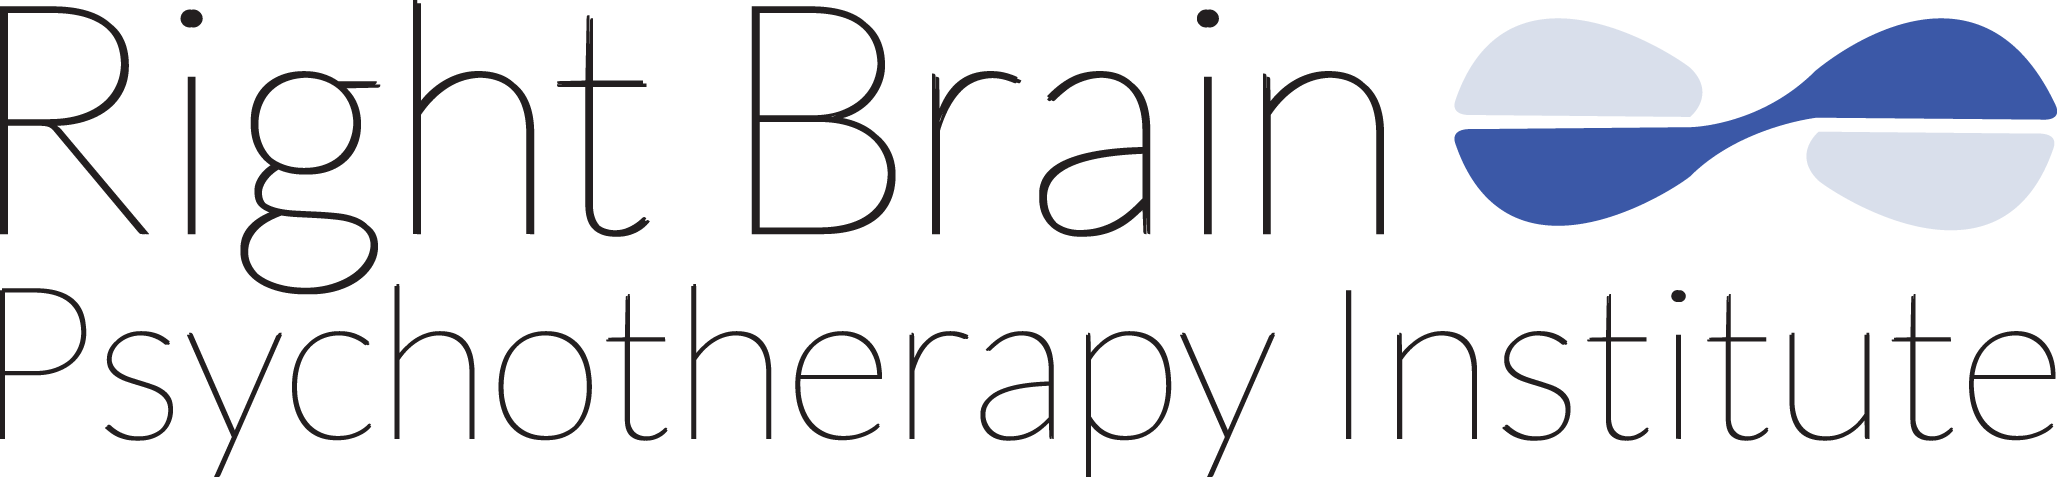 Right Brain Psychotherapy Institute Logo